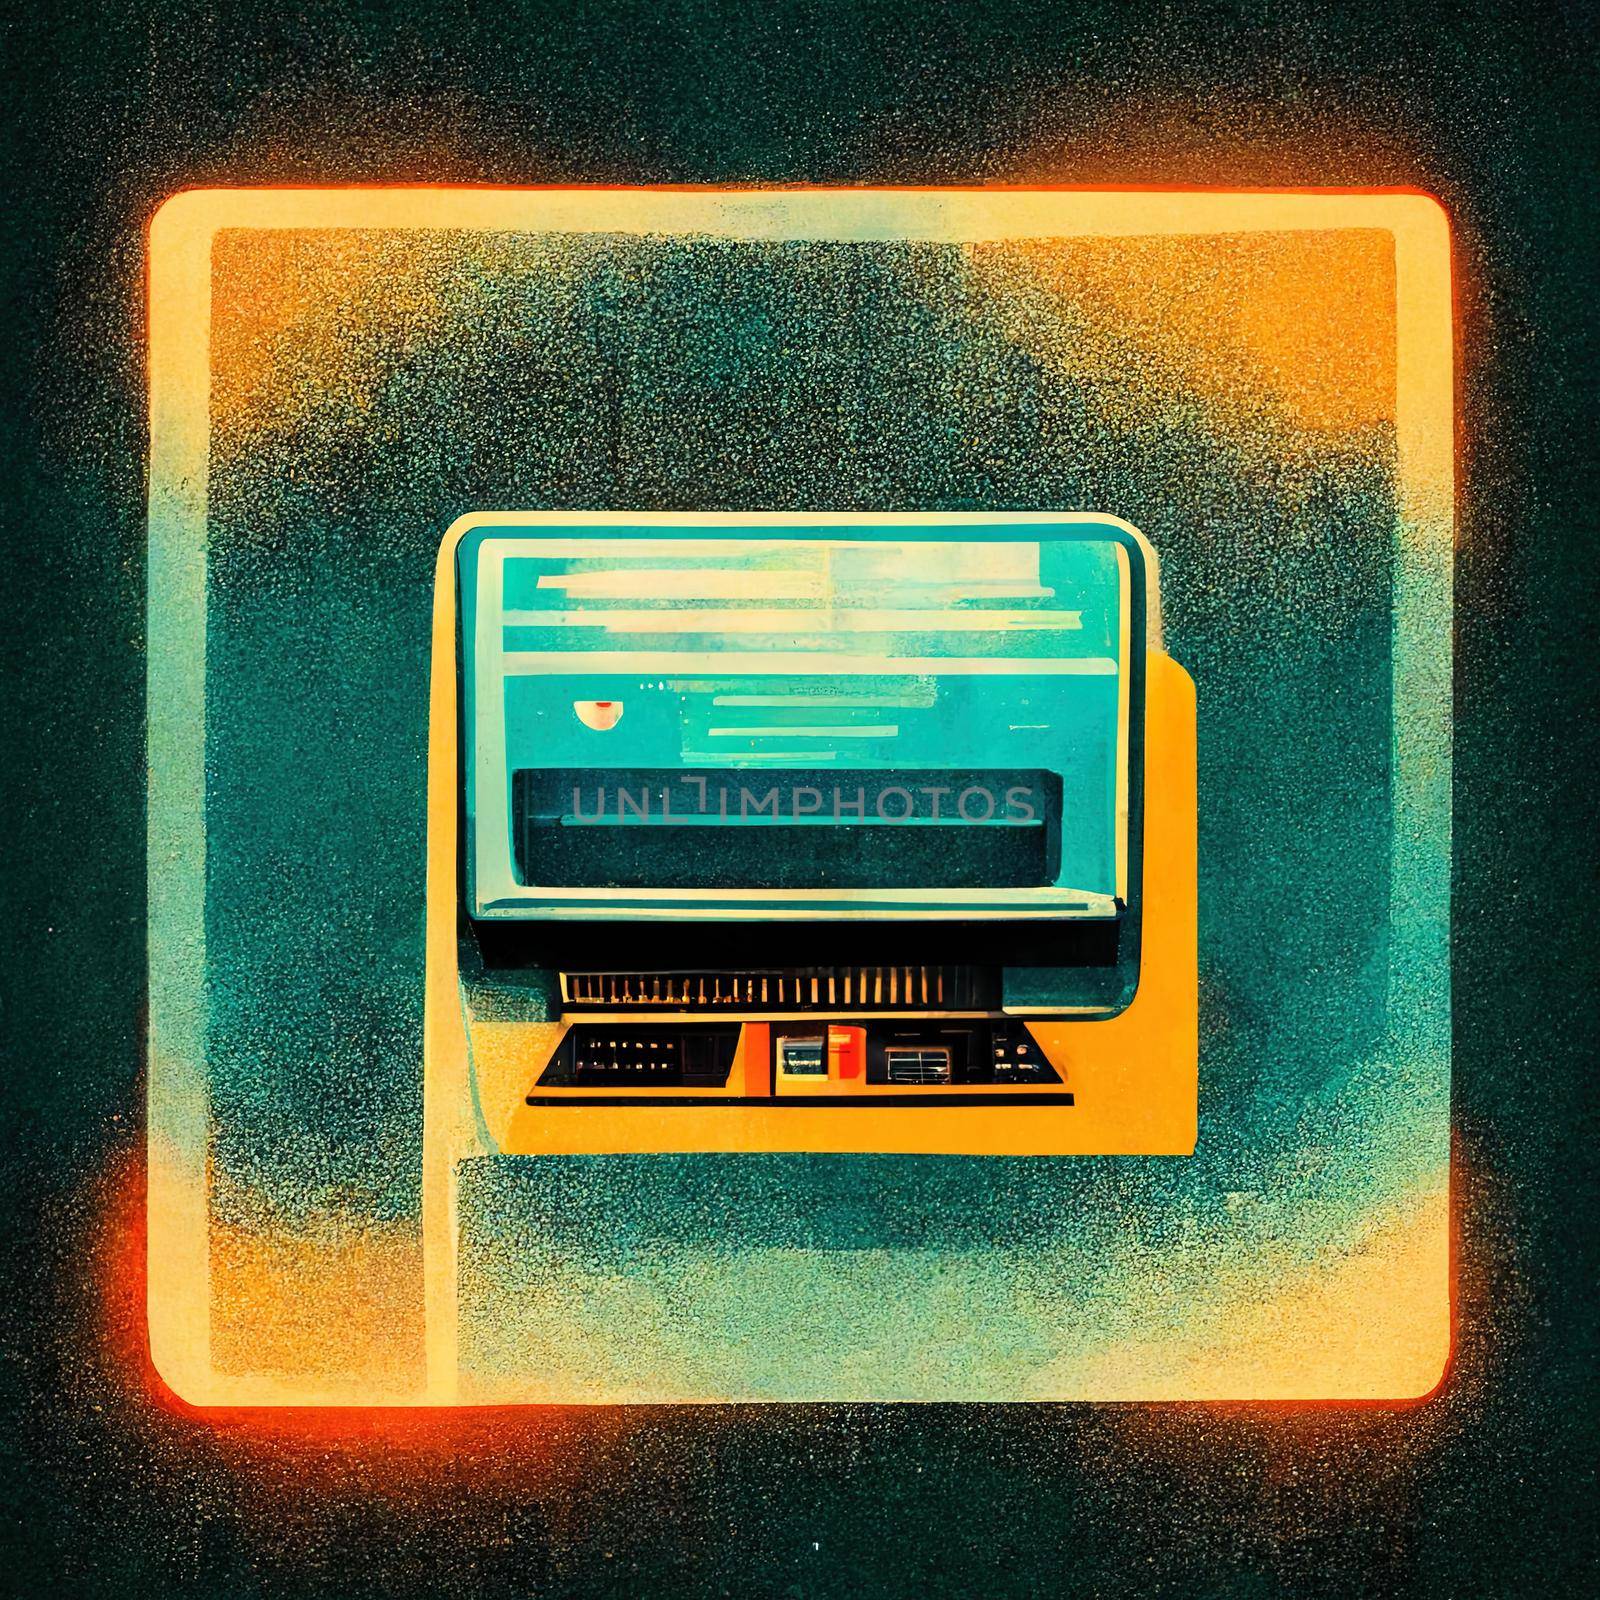 Old grungy style network computer icon by 2ragon